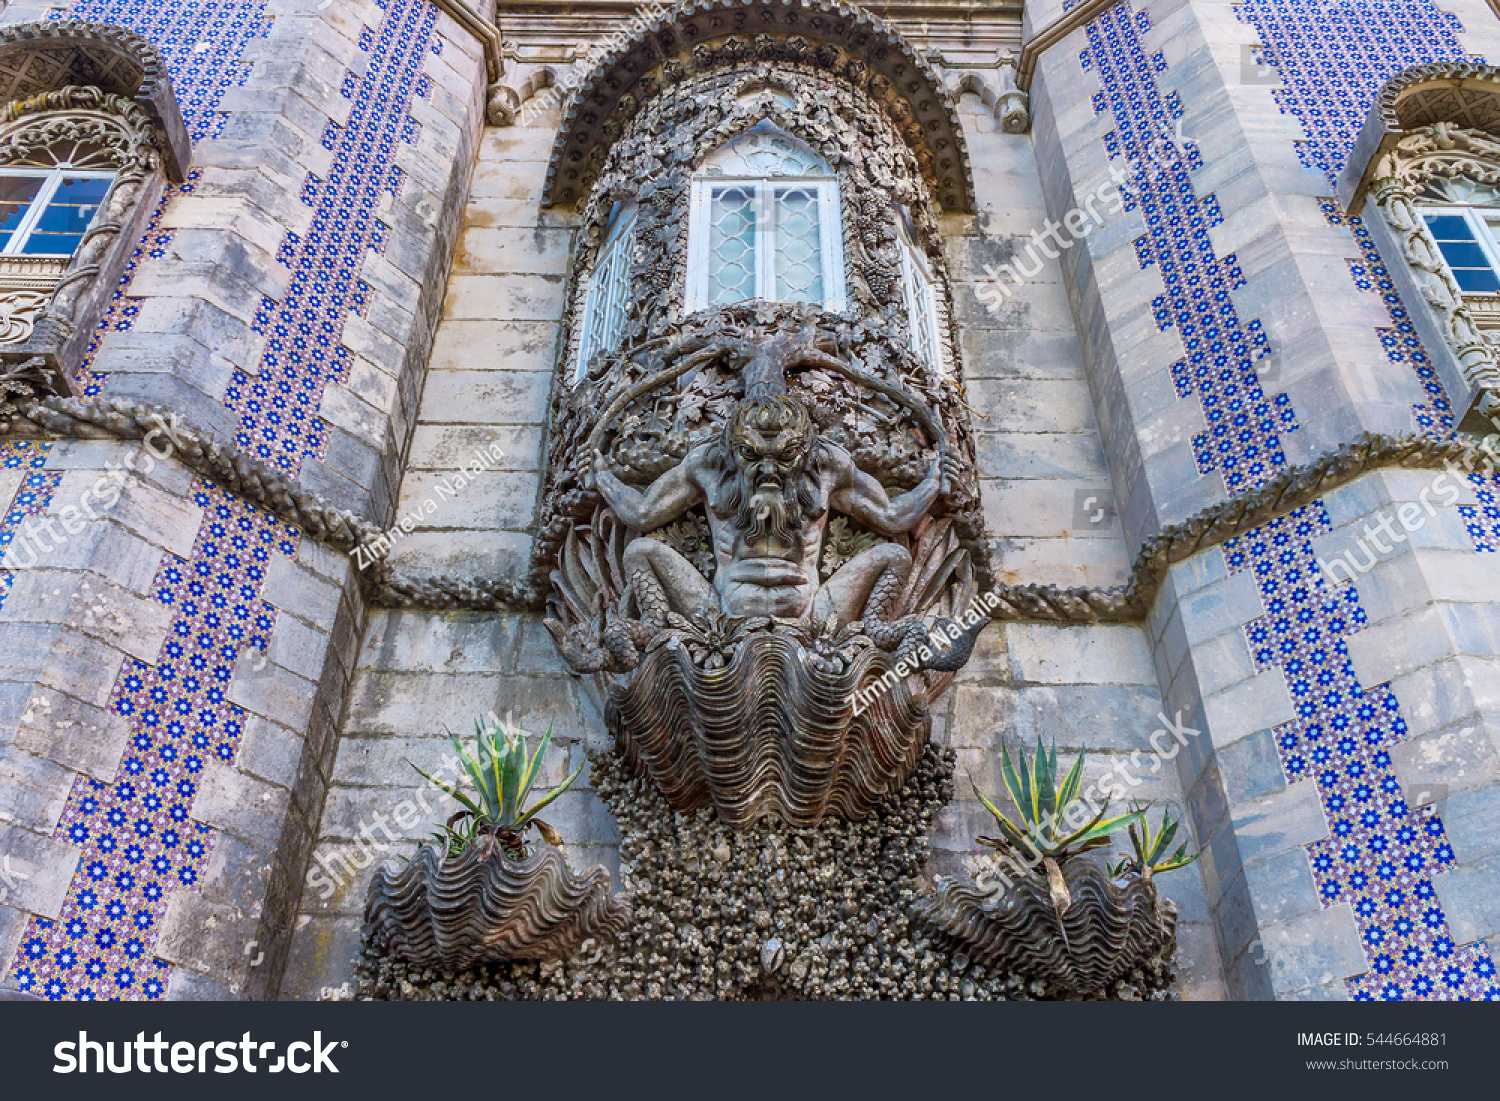 Carved stone figure of a sea monster in a wall at the Palacio da Pena, Sintra, Portugal. Pena National Palace the oldest palace inspired by European Romanticism. UNESCO World Heritage Site #544664881